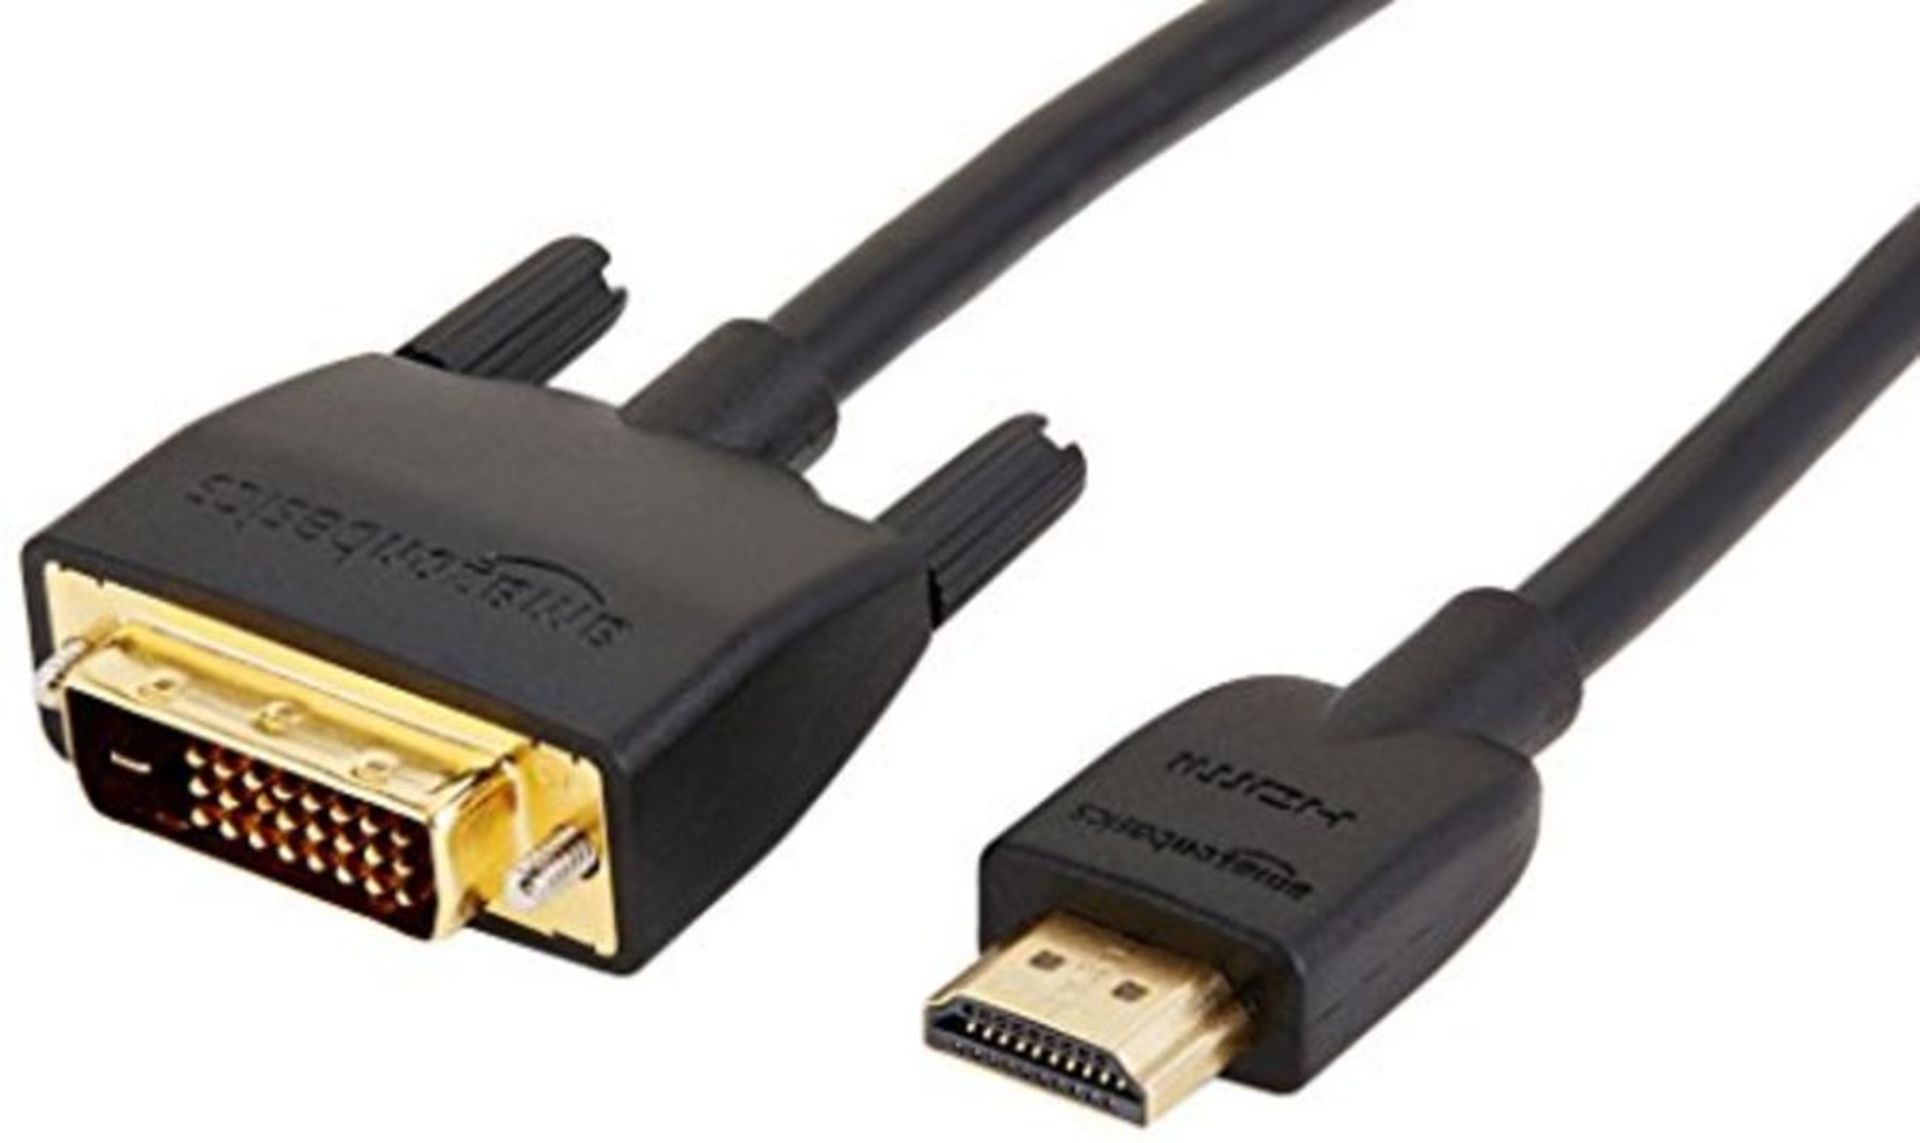 RRP £63.00 Amazon Basics HDMI to DVI Adapter Cable - 6 Feet, 24-Pack (Not for connecting to SCART